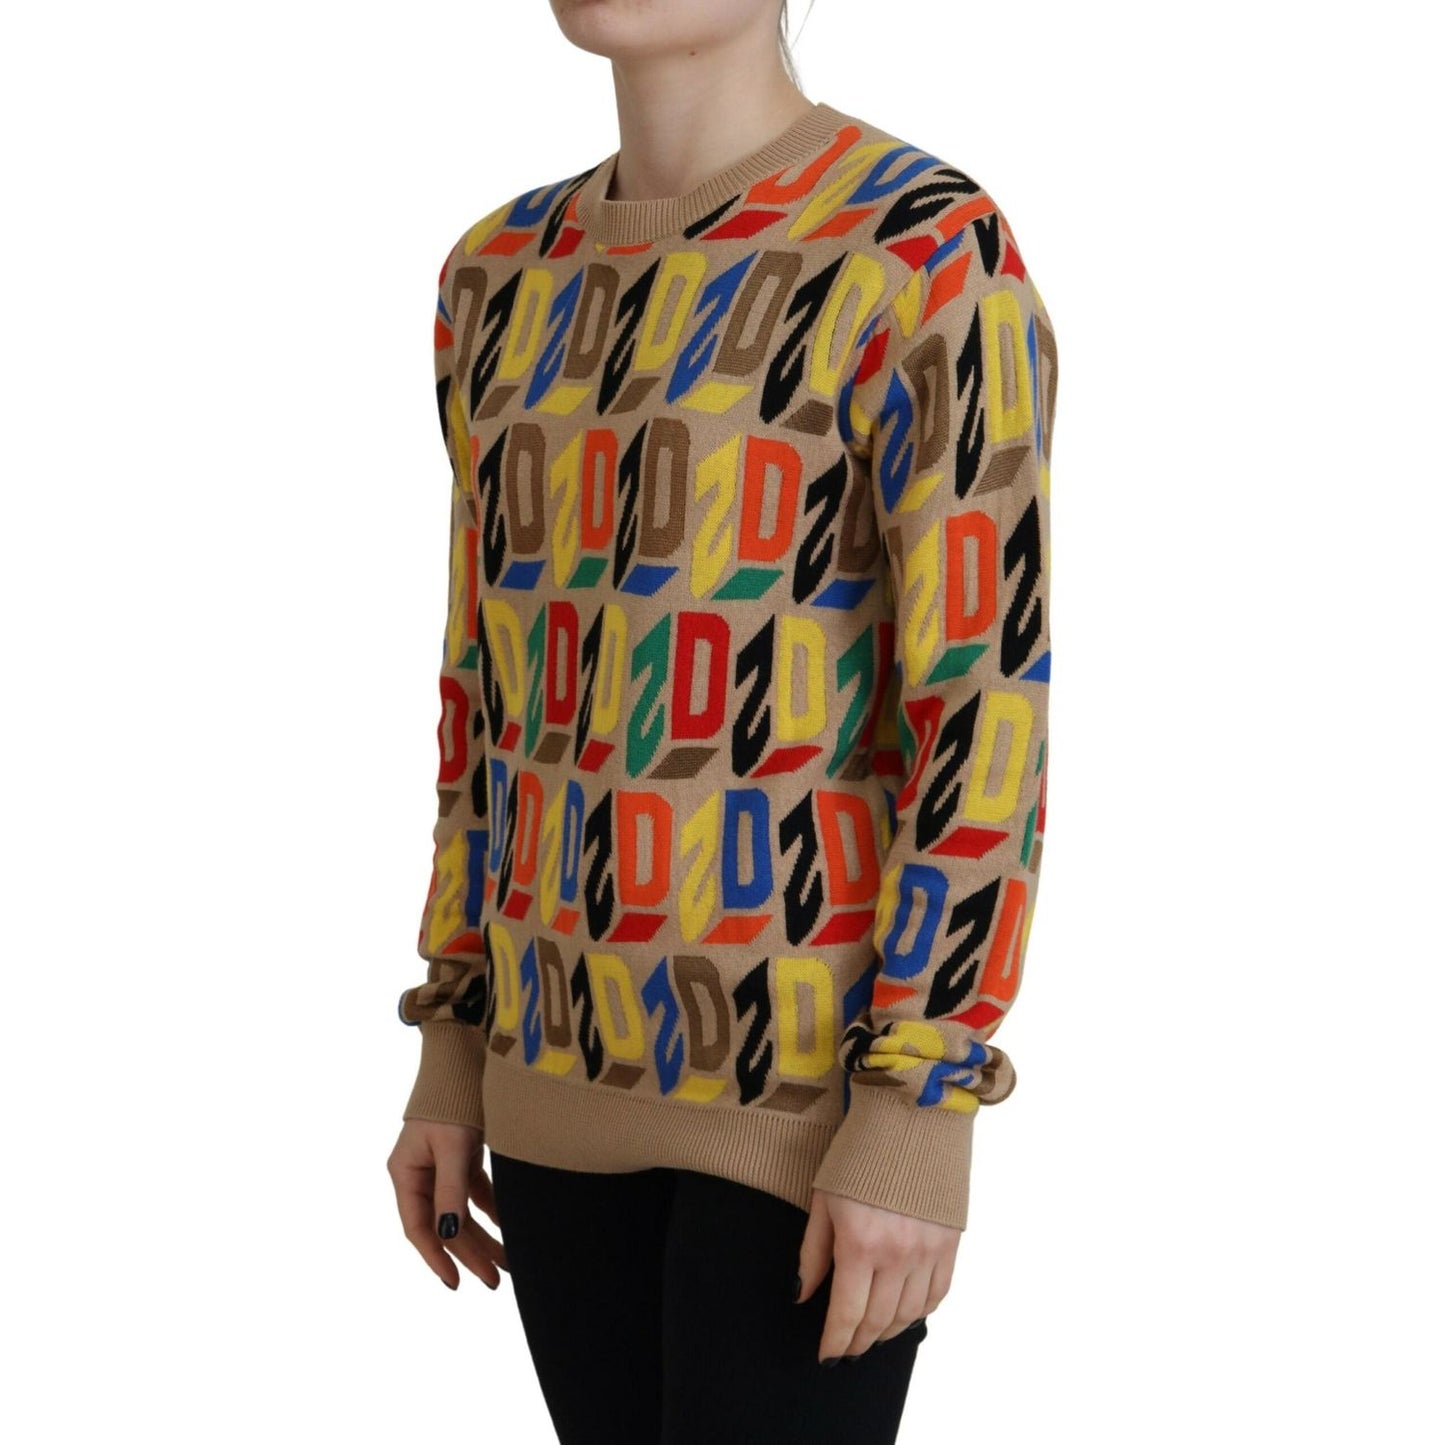 Dsquared² Brown Cotton Long Sleeve Crew Neck Printed Sweater brown-cotton-long-sleeve-crew-neck-printed-sweater